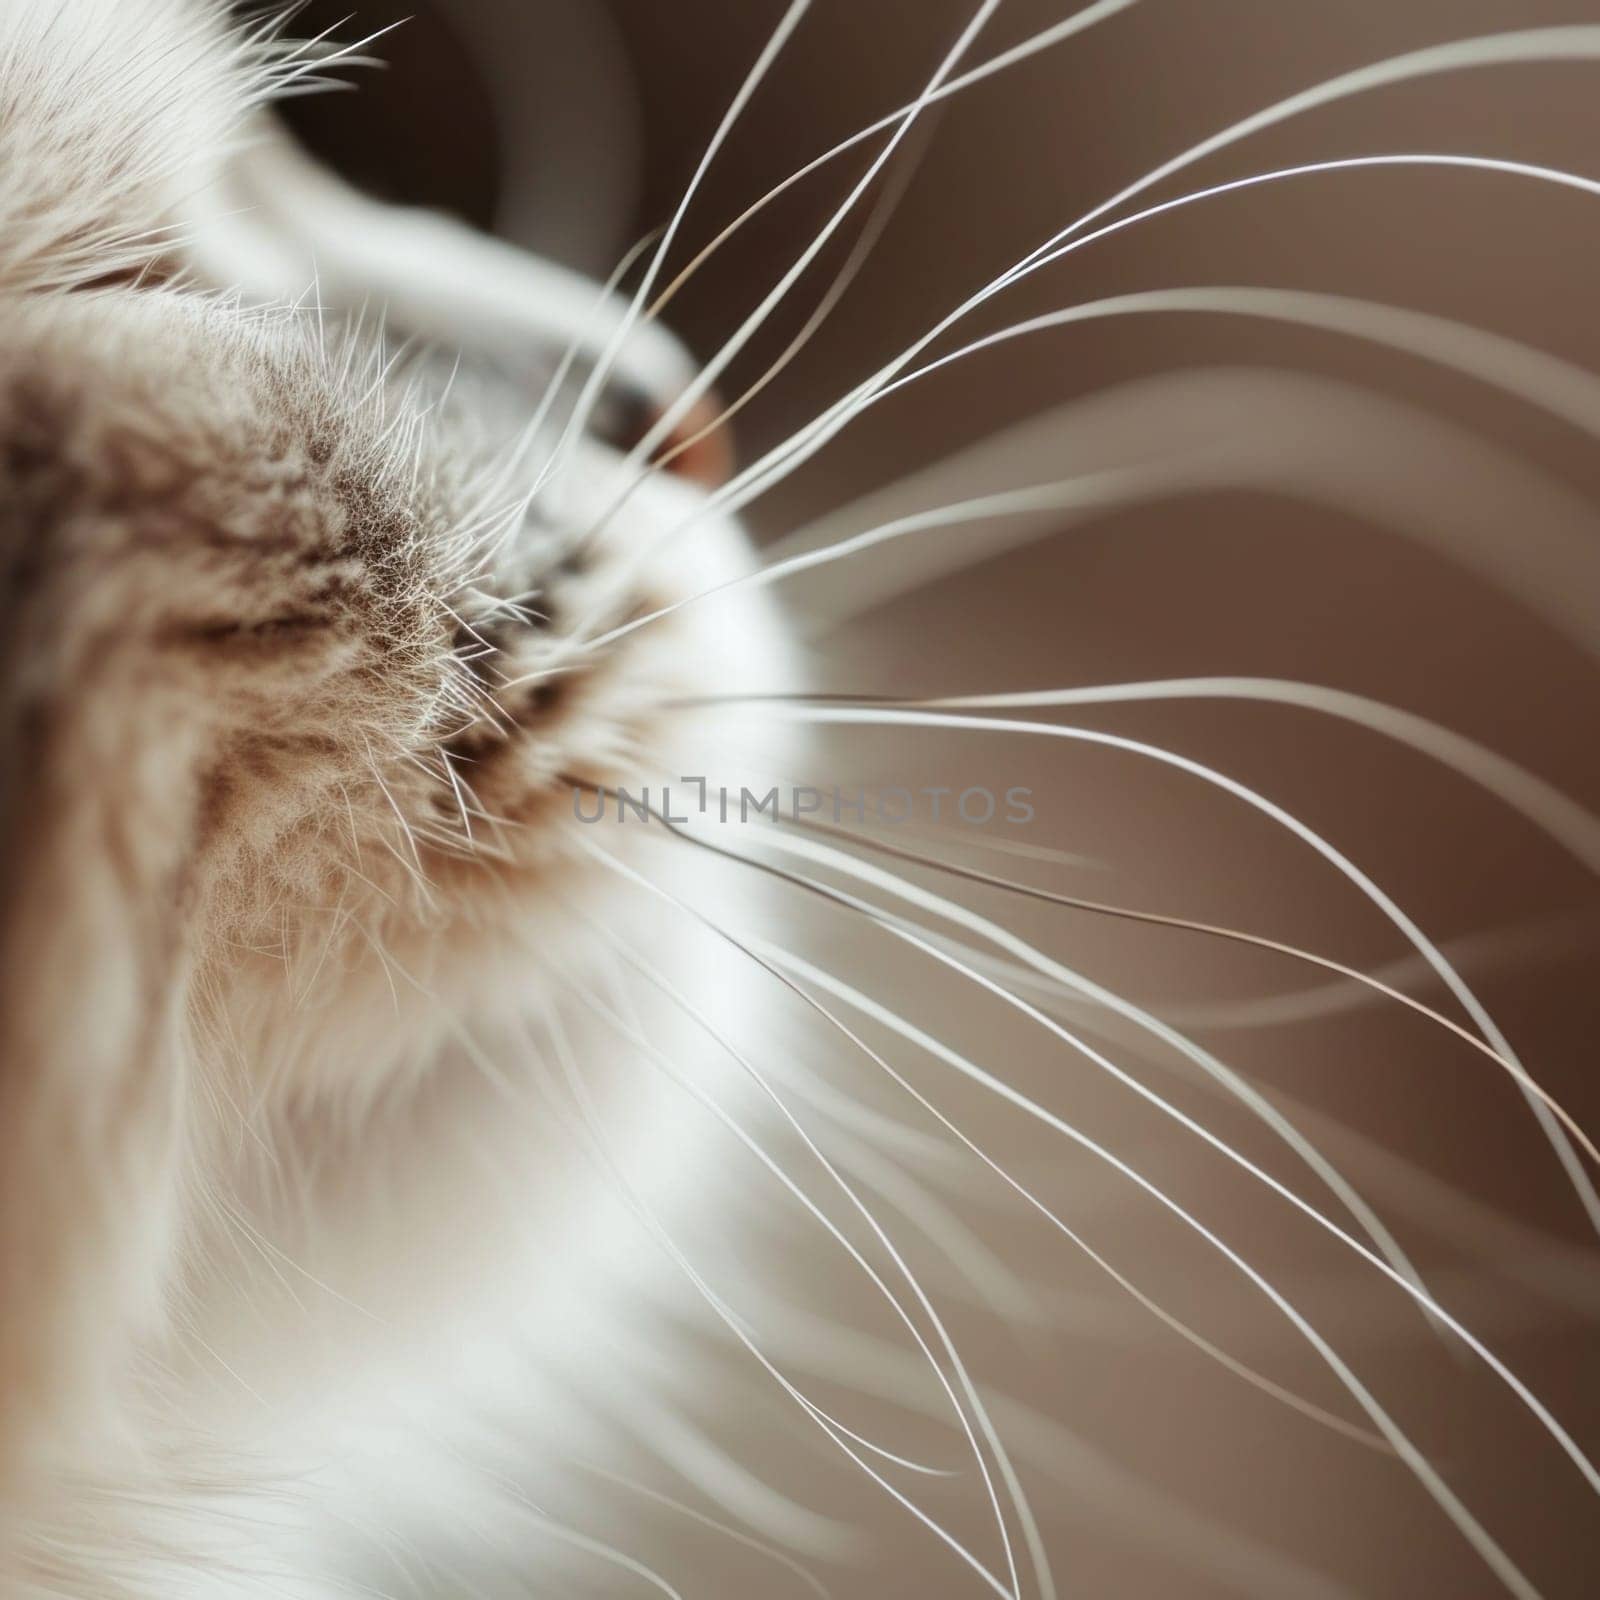 A close up of a cat's face with long hair